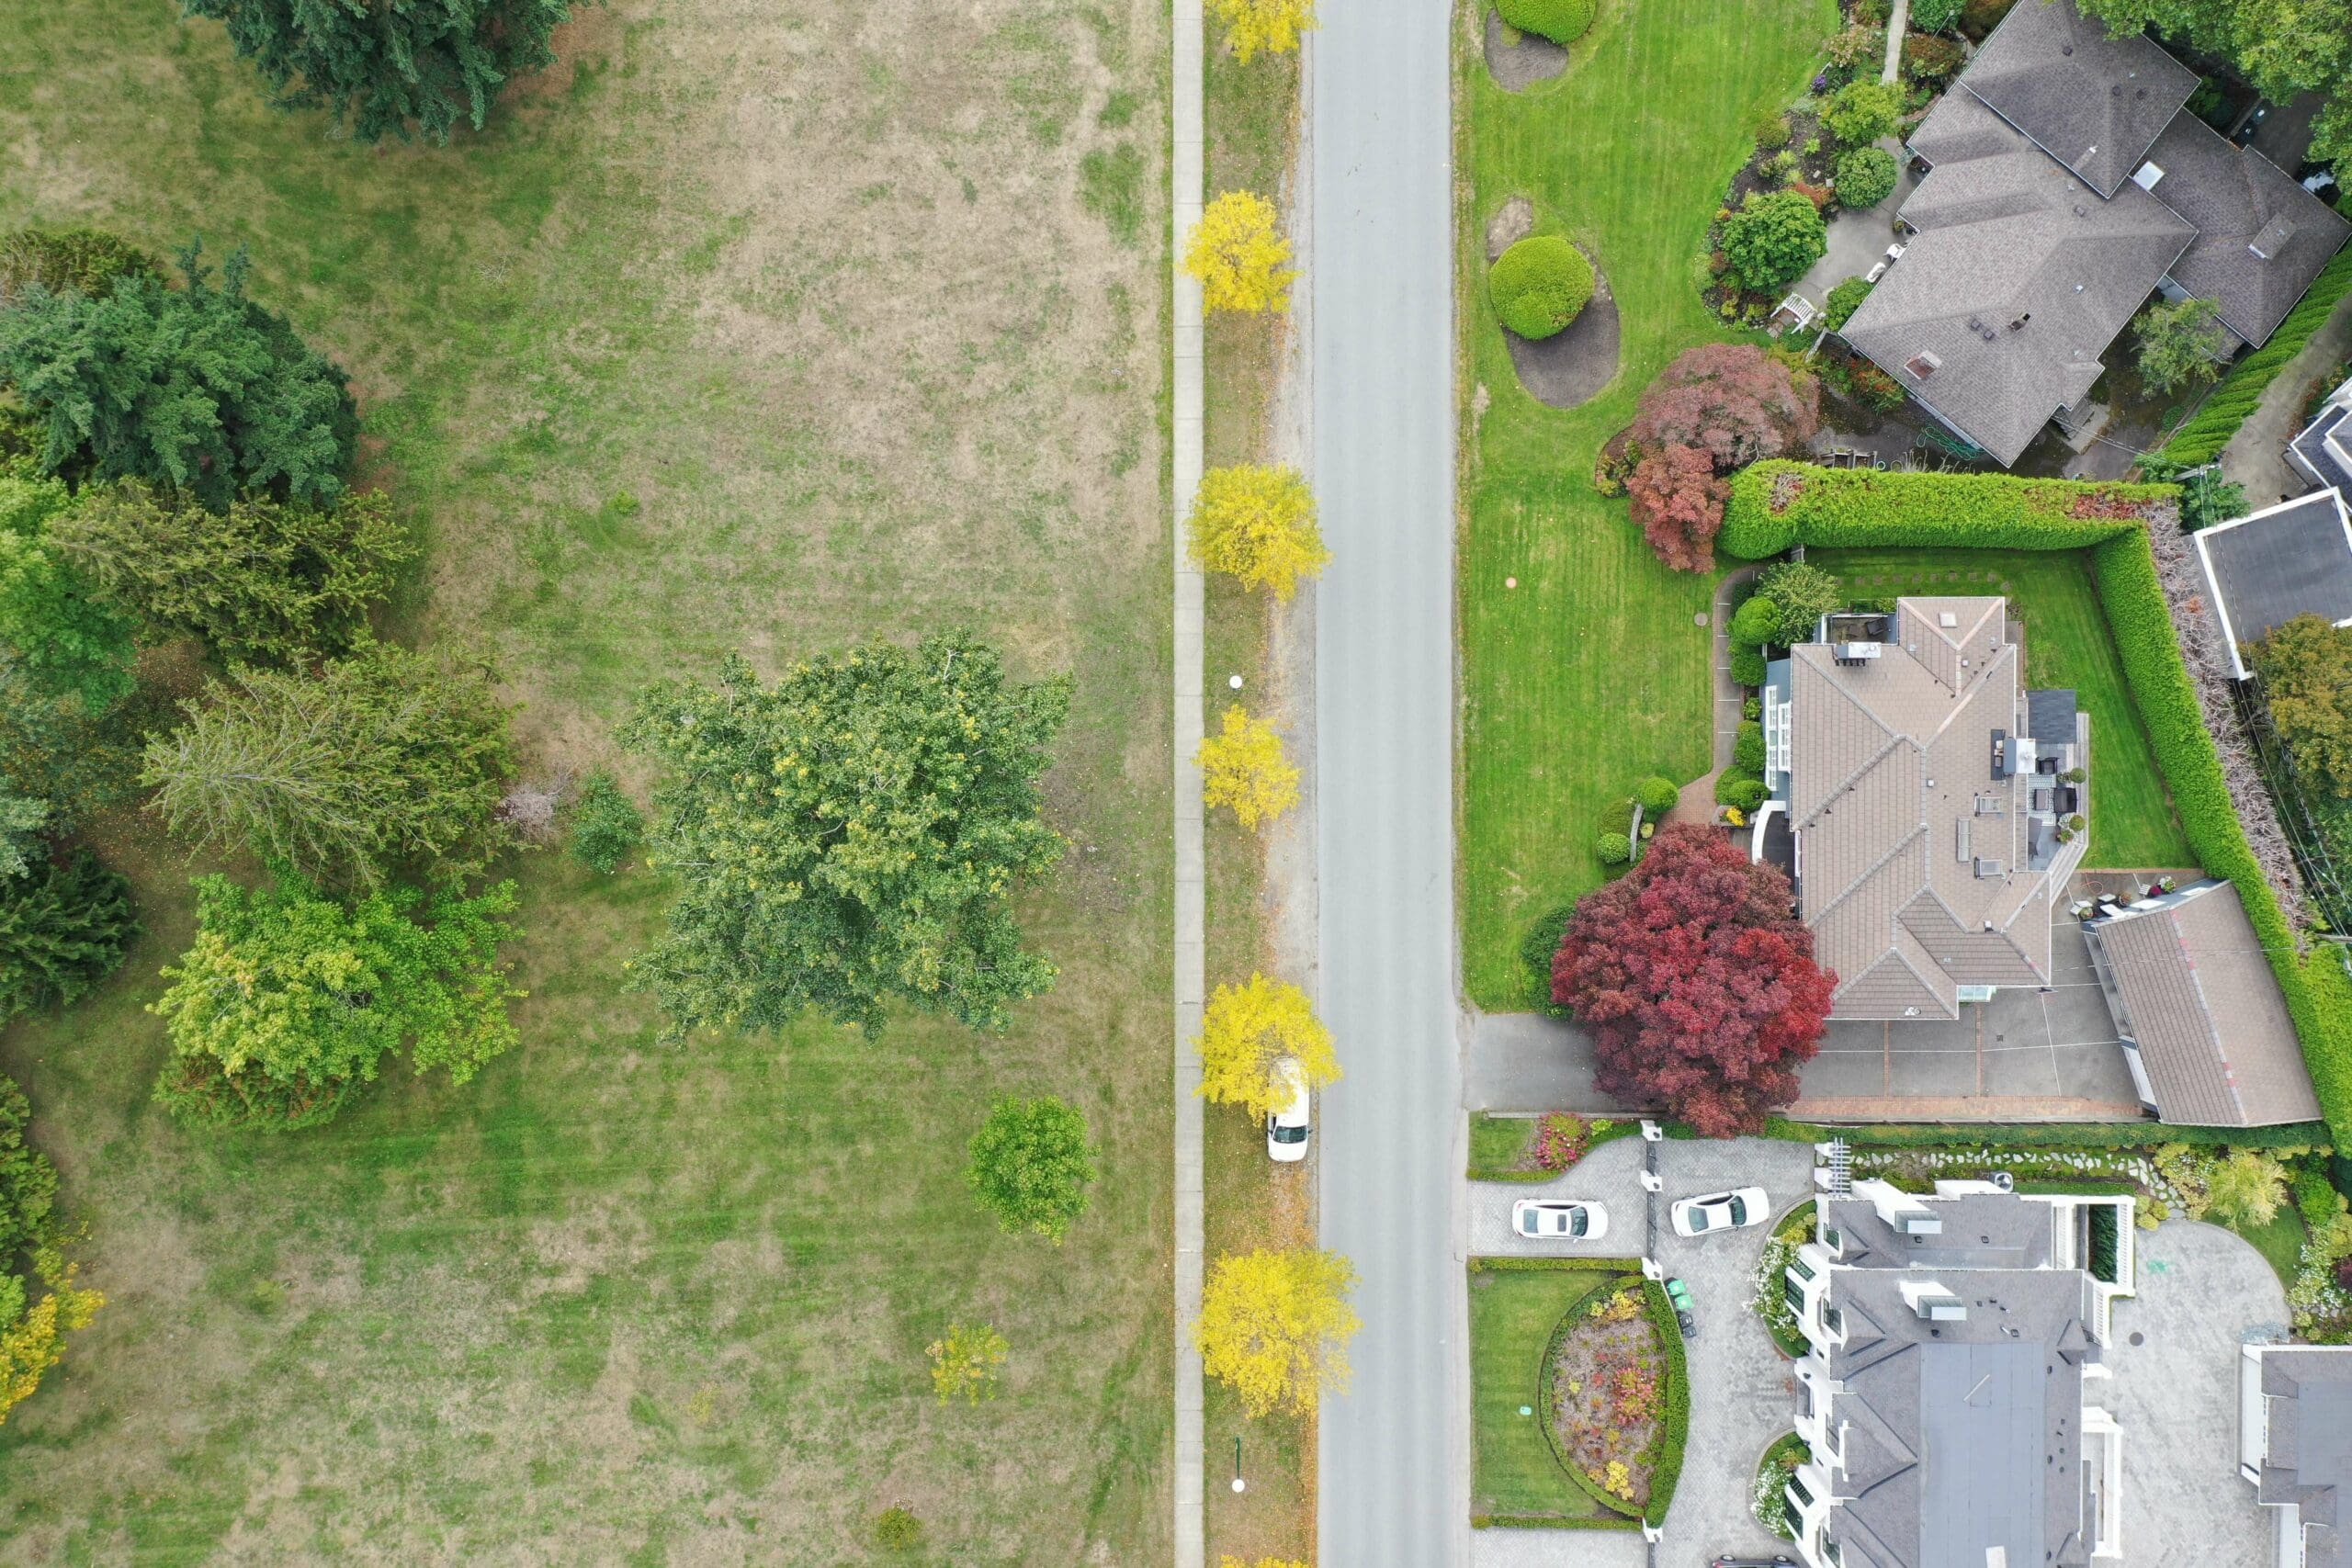 Aerial view of trees on park to the left and trees in residential area on the right